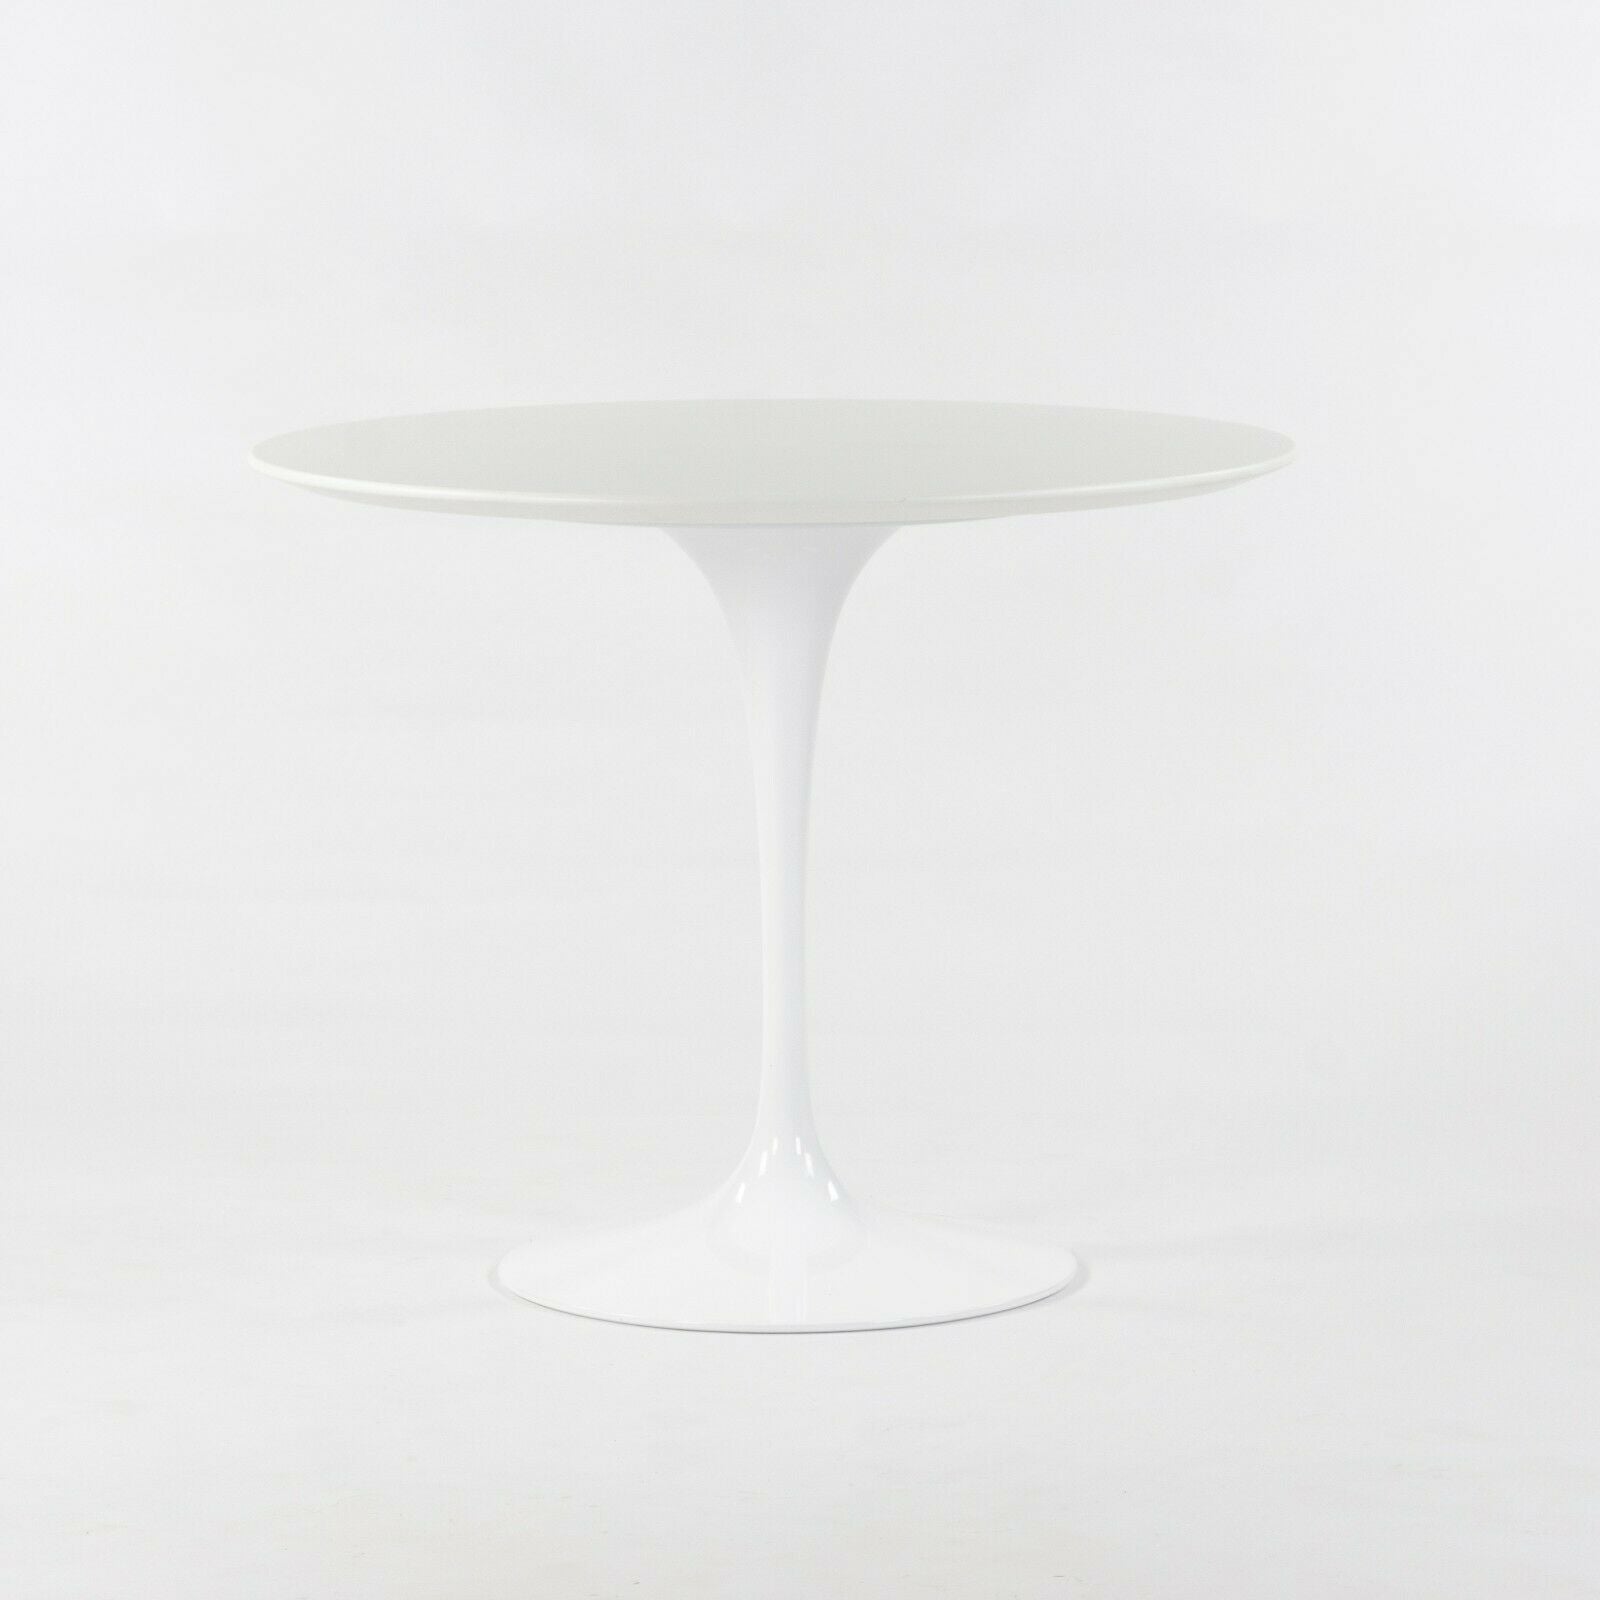 SOLD 2020 Eero Saarinen for Knoll Studio 35 Inch White Laminate Round Dining Table